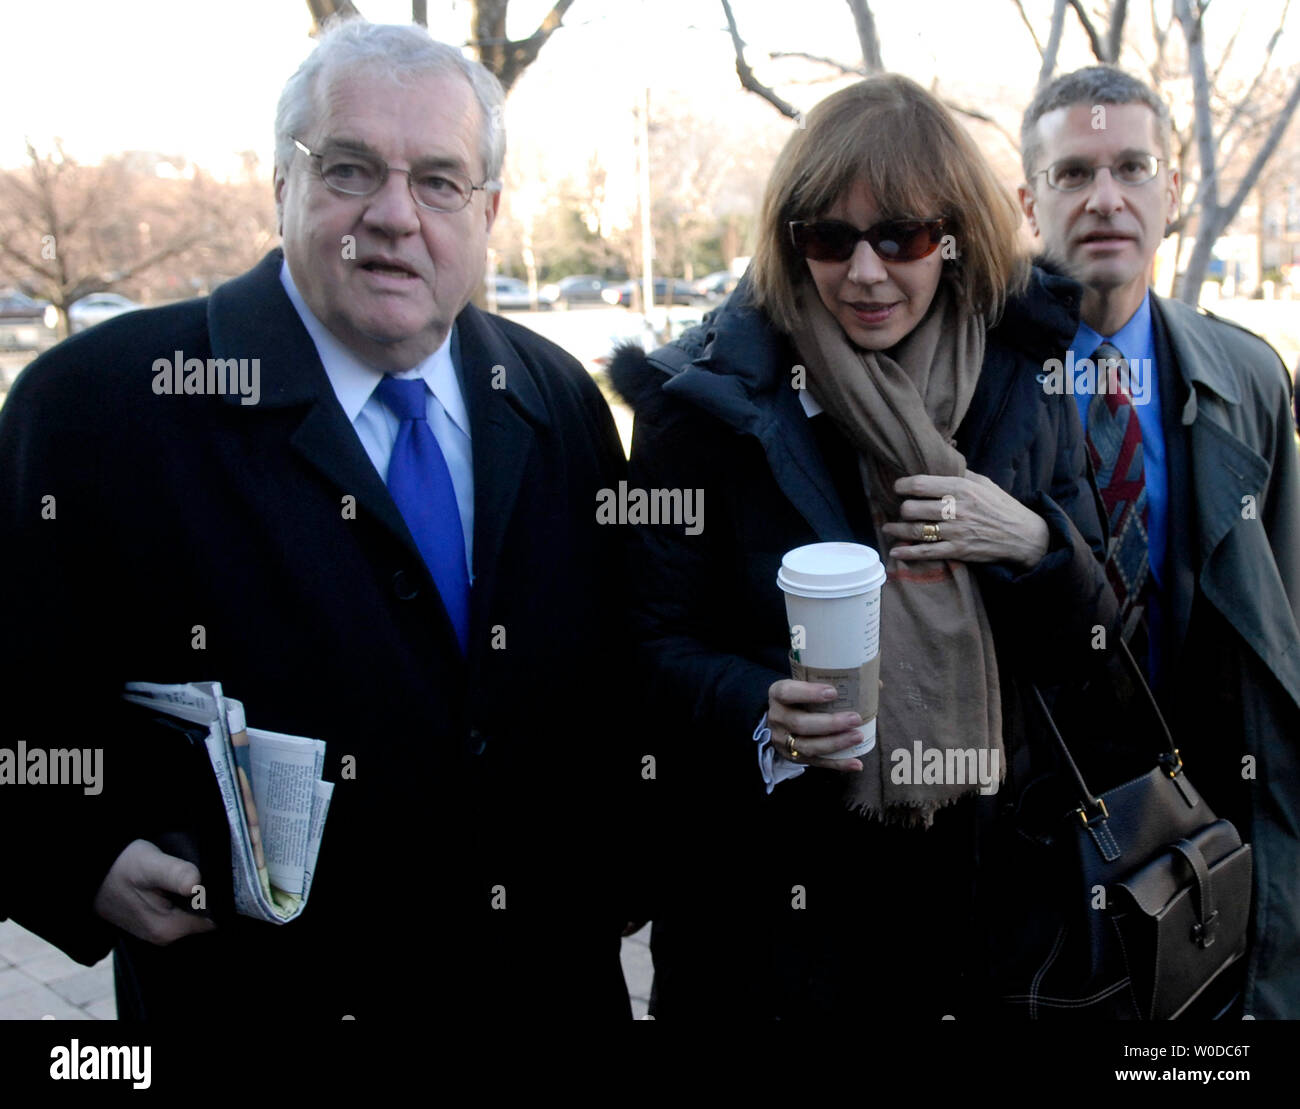 Former New York Times journalist Judith Miller (C) and her attorney Robert Bennett arrive at the U.S. District Court in Washington on January 30, 2007. Miller is to testify at the I. Lewis “Scooter” Libby perjury trial. Libby is on trial for perjury in relation to the leaking of CIA agent Valeria Plame's name to the press.  (UPI Photo/Kevin Dietsch) Stock Photo